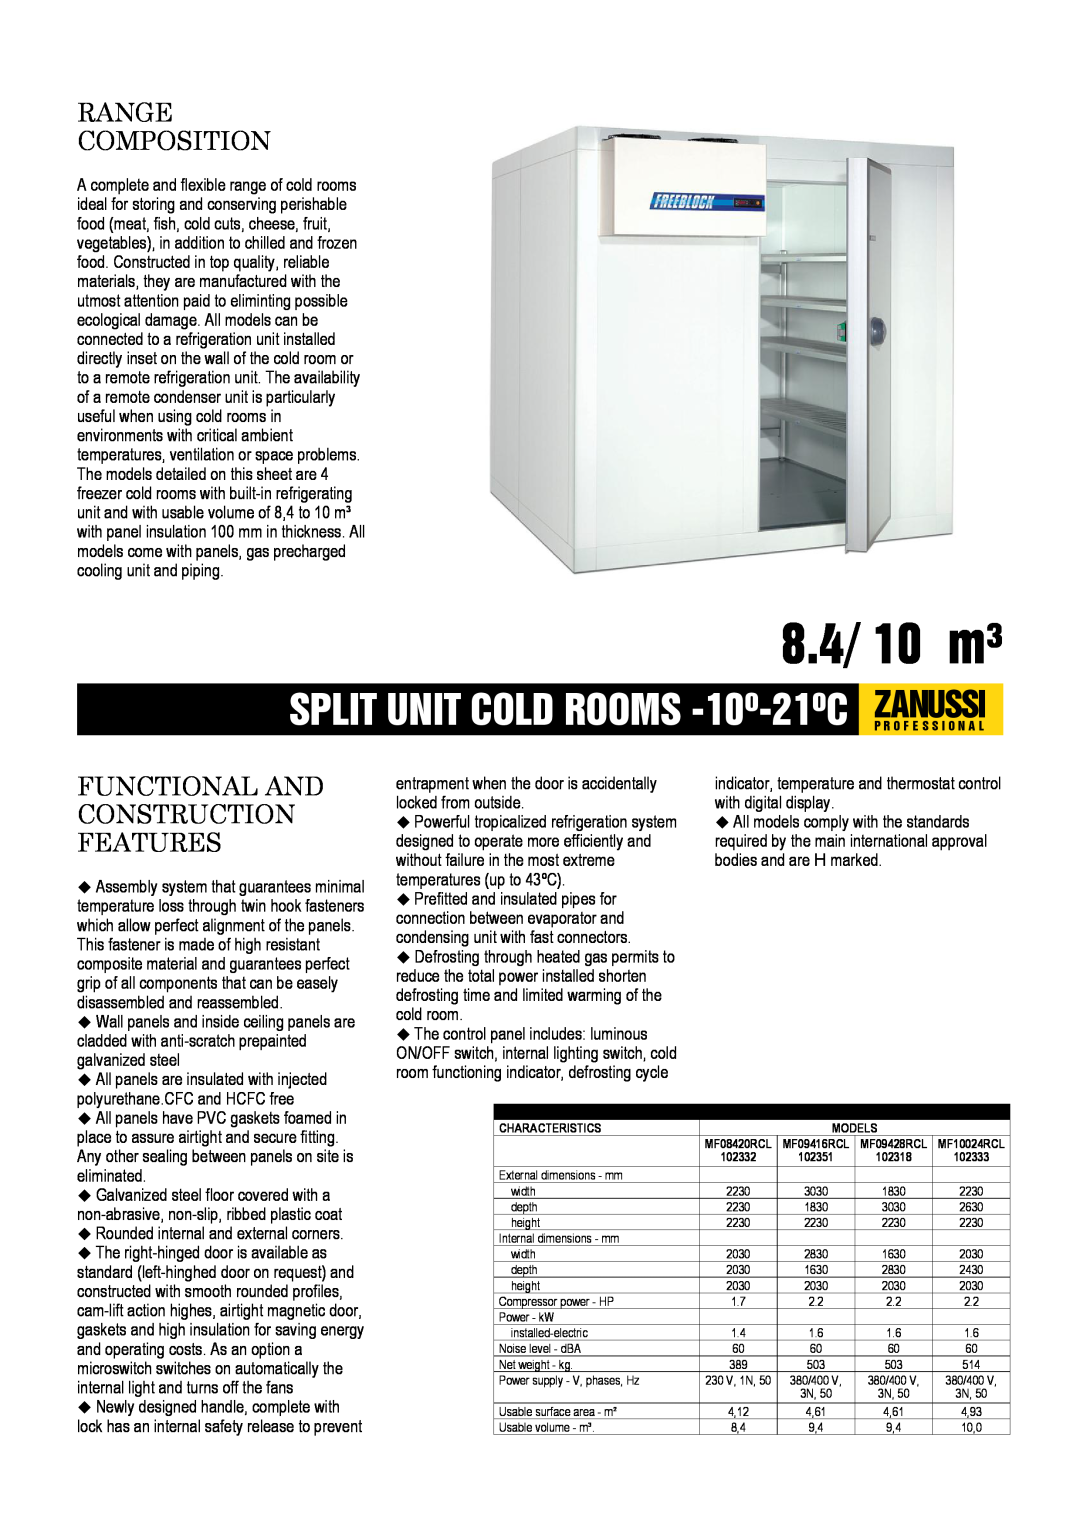 Zanussi MF10024RCL, MF09416RCL, MF08420RCL dimensions 8.4/ 10 m³, Range Composition, Functional And Construction Features 